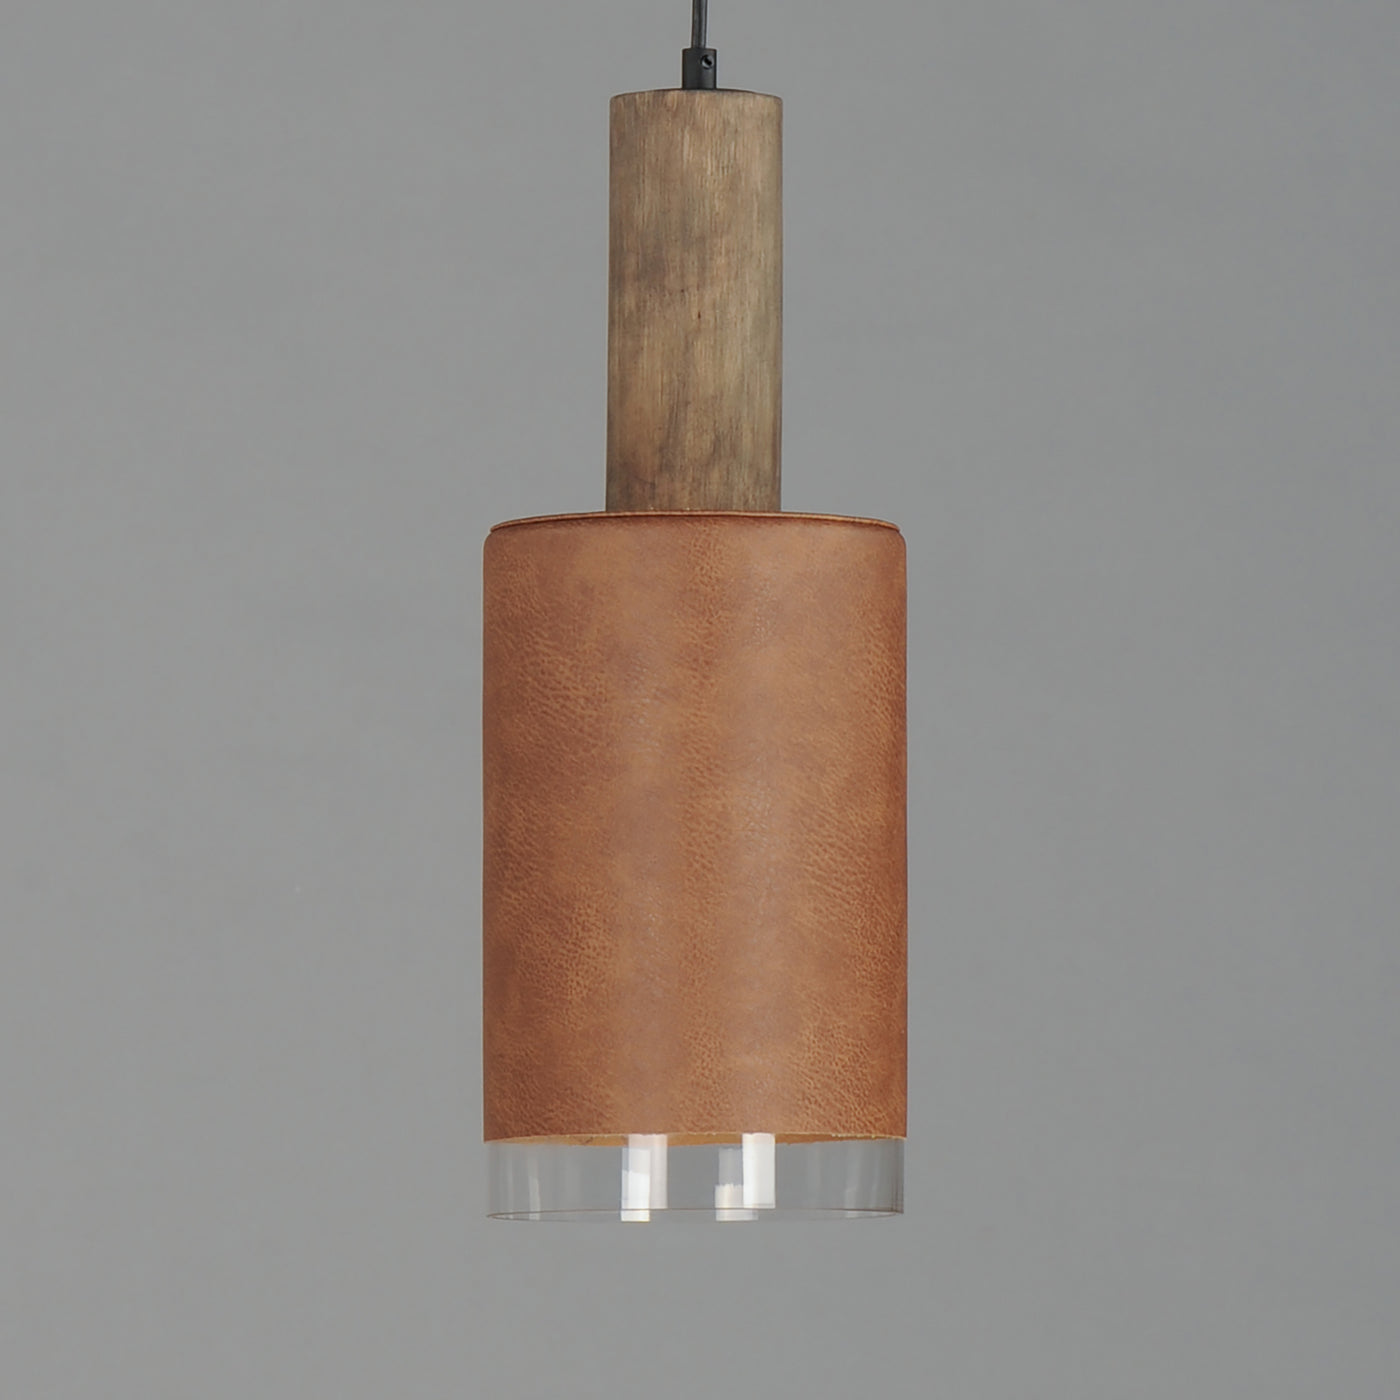 Weathered Wood and Tan Leather with Clear Glass Shade Pendant